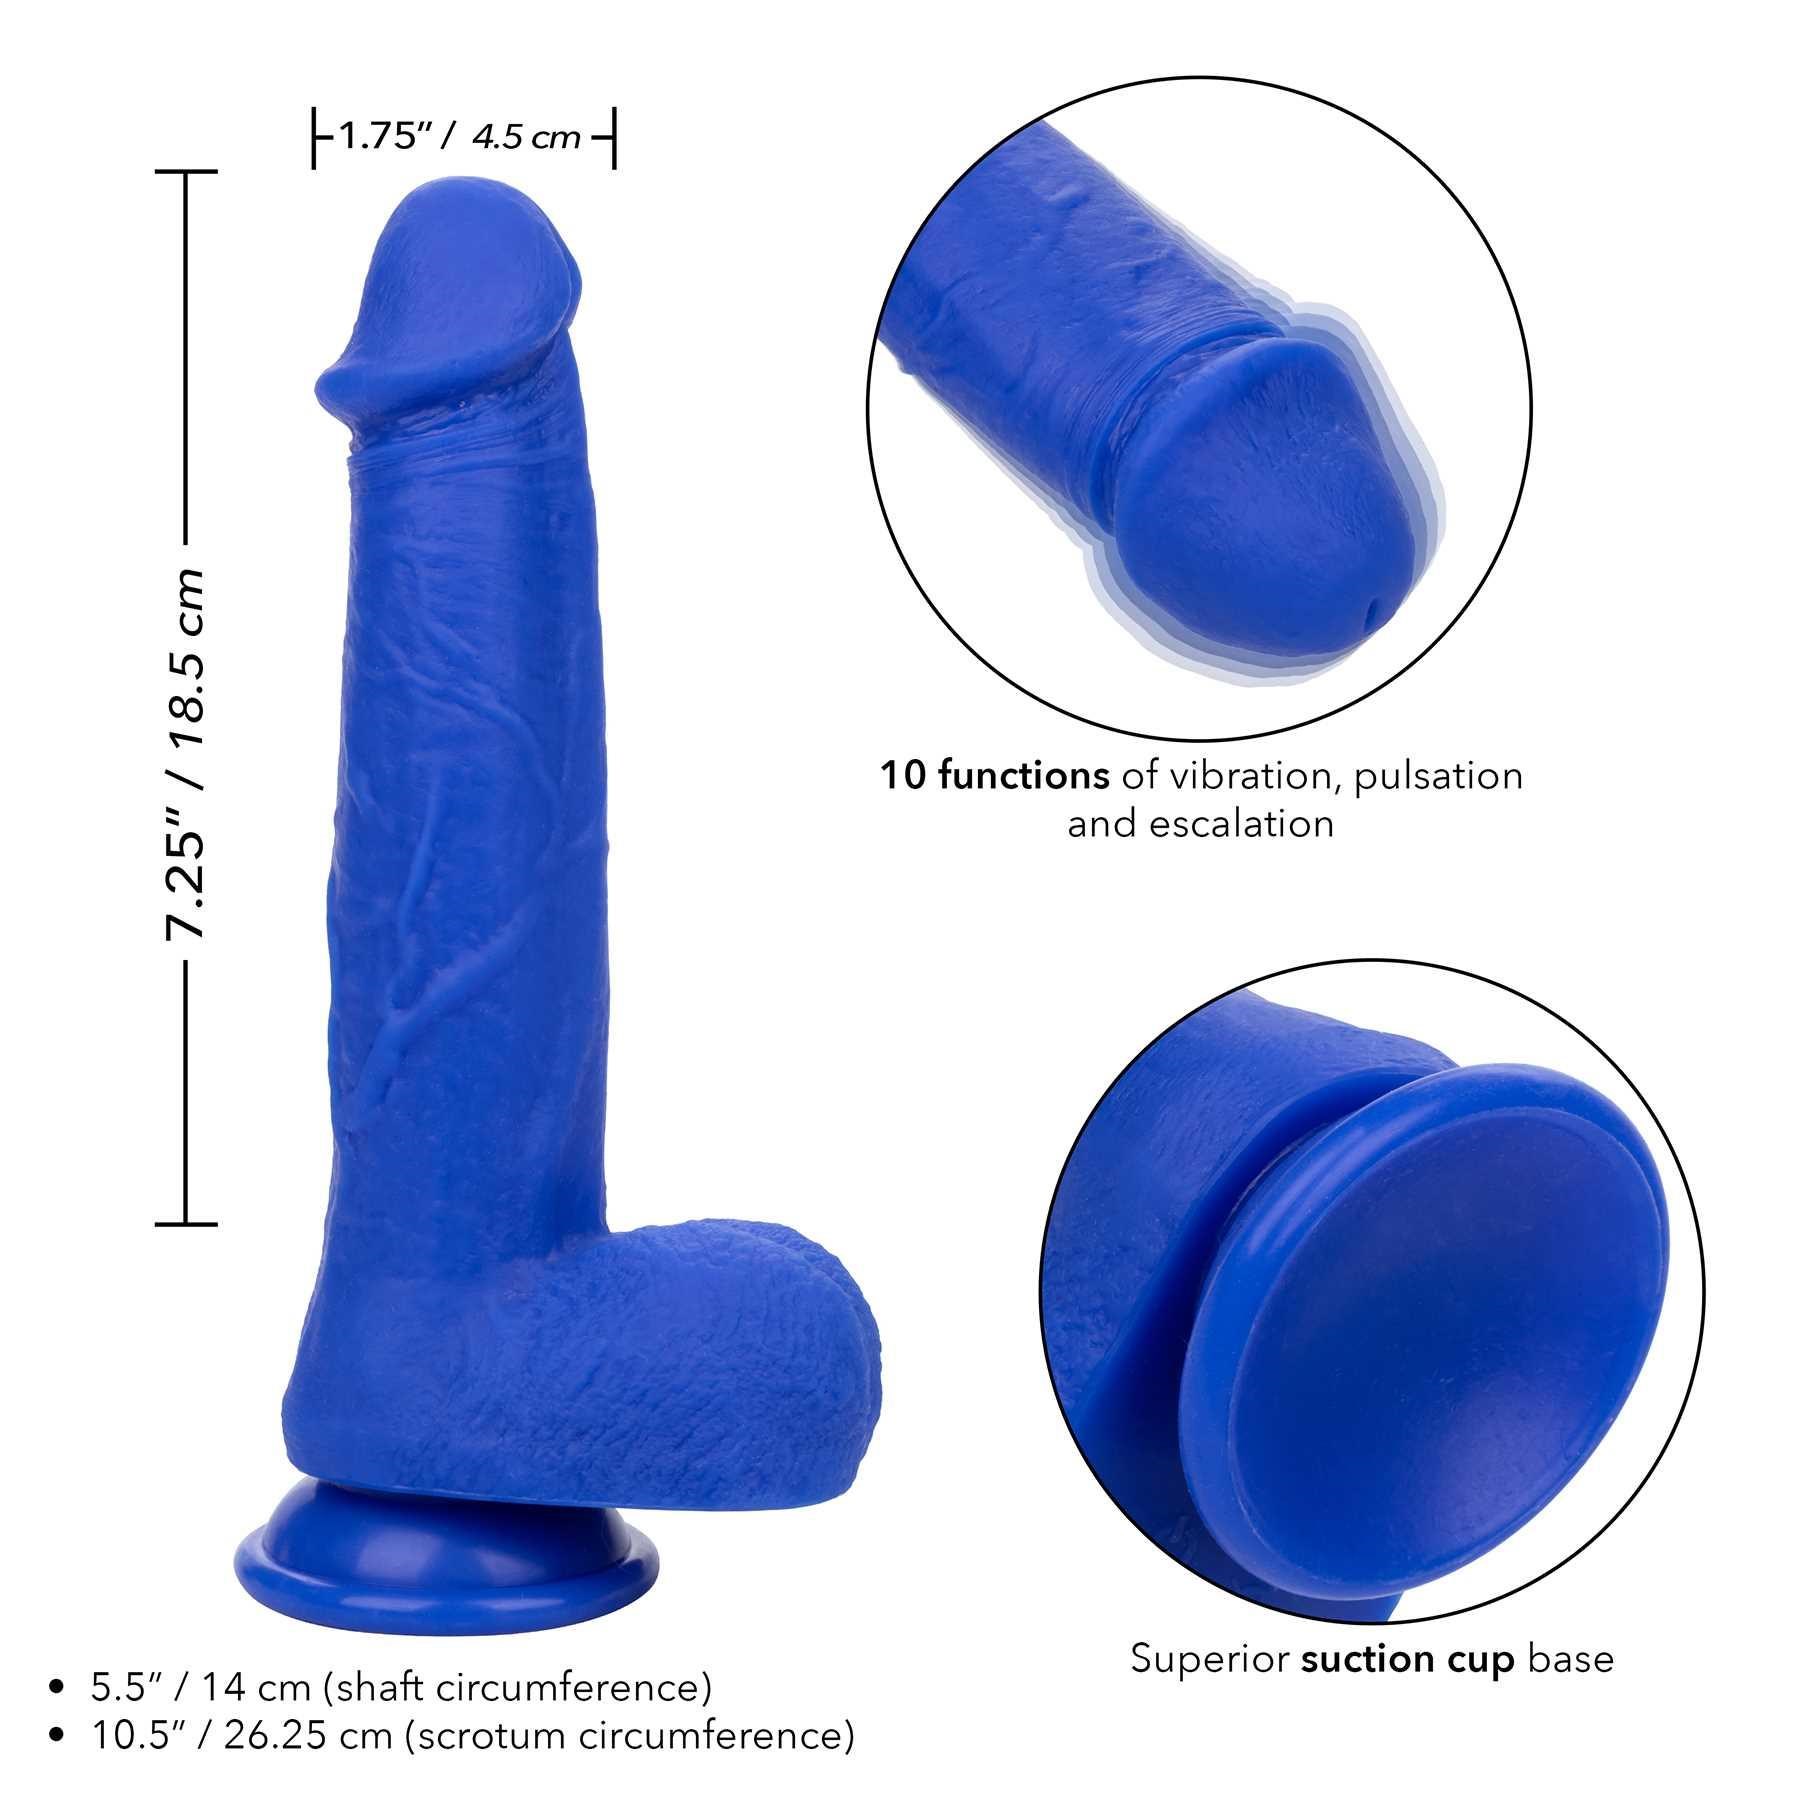 Admiral 8 Inch Vibrating Captain Dildo specifications